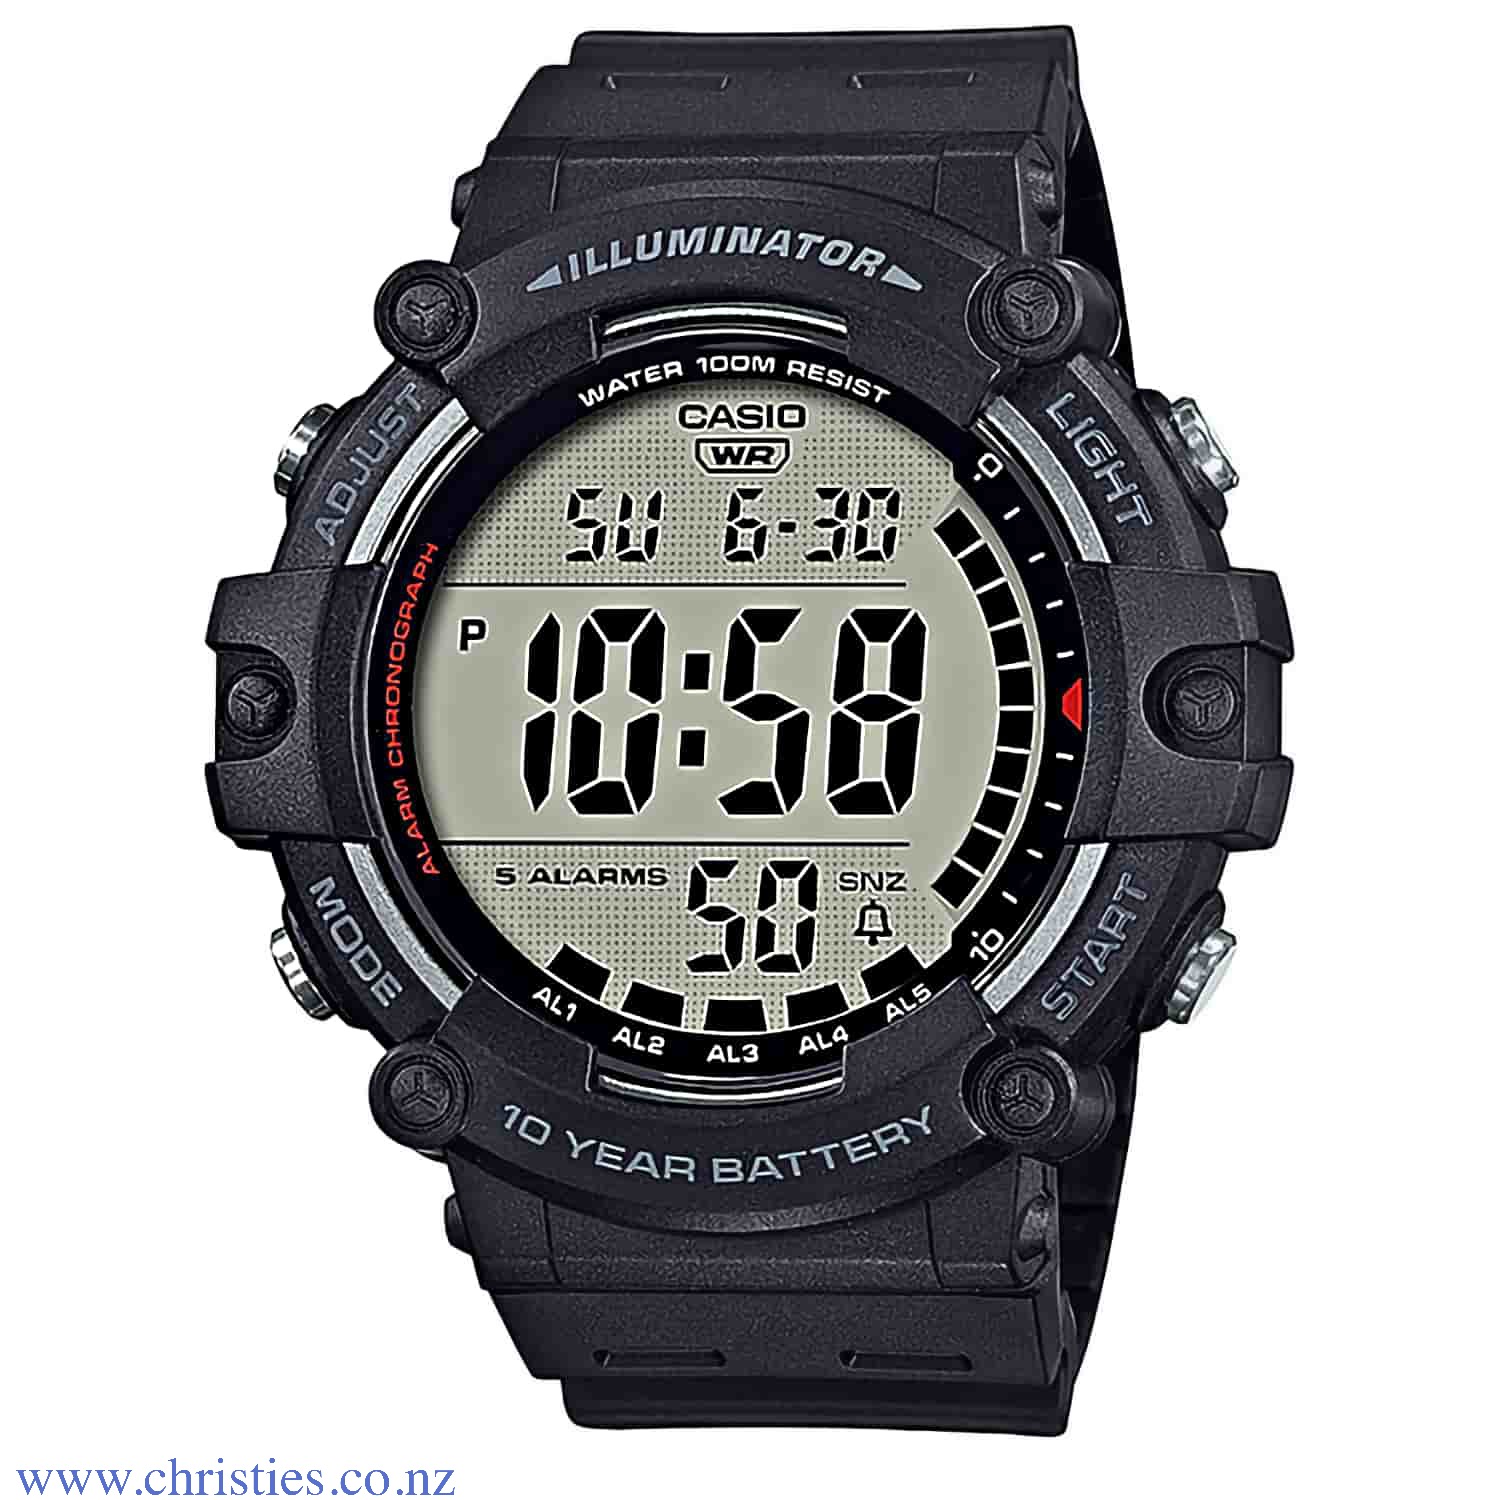 AE1500WH-1AV Casio Digital Watch. LAYBUY - Pay it easy, in 6 weekly payments and have it now. Only pay the price of your purchase, when you pay your instalments on time. A late fee may be applied for missed payments. Create an account in a few easy steps 